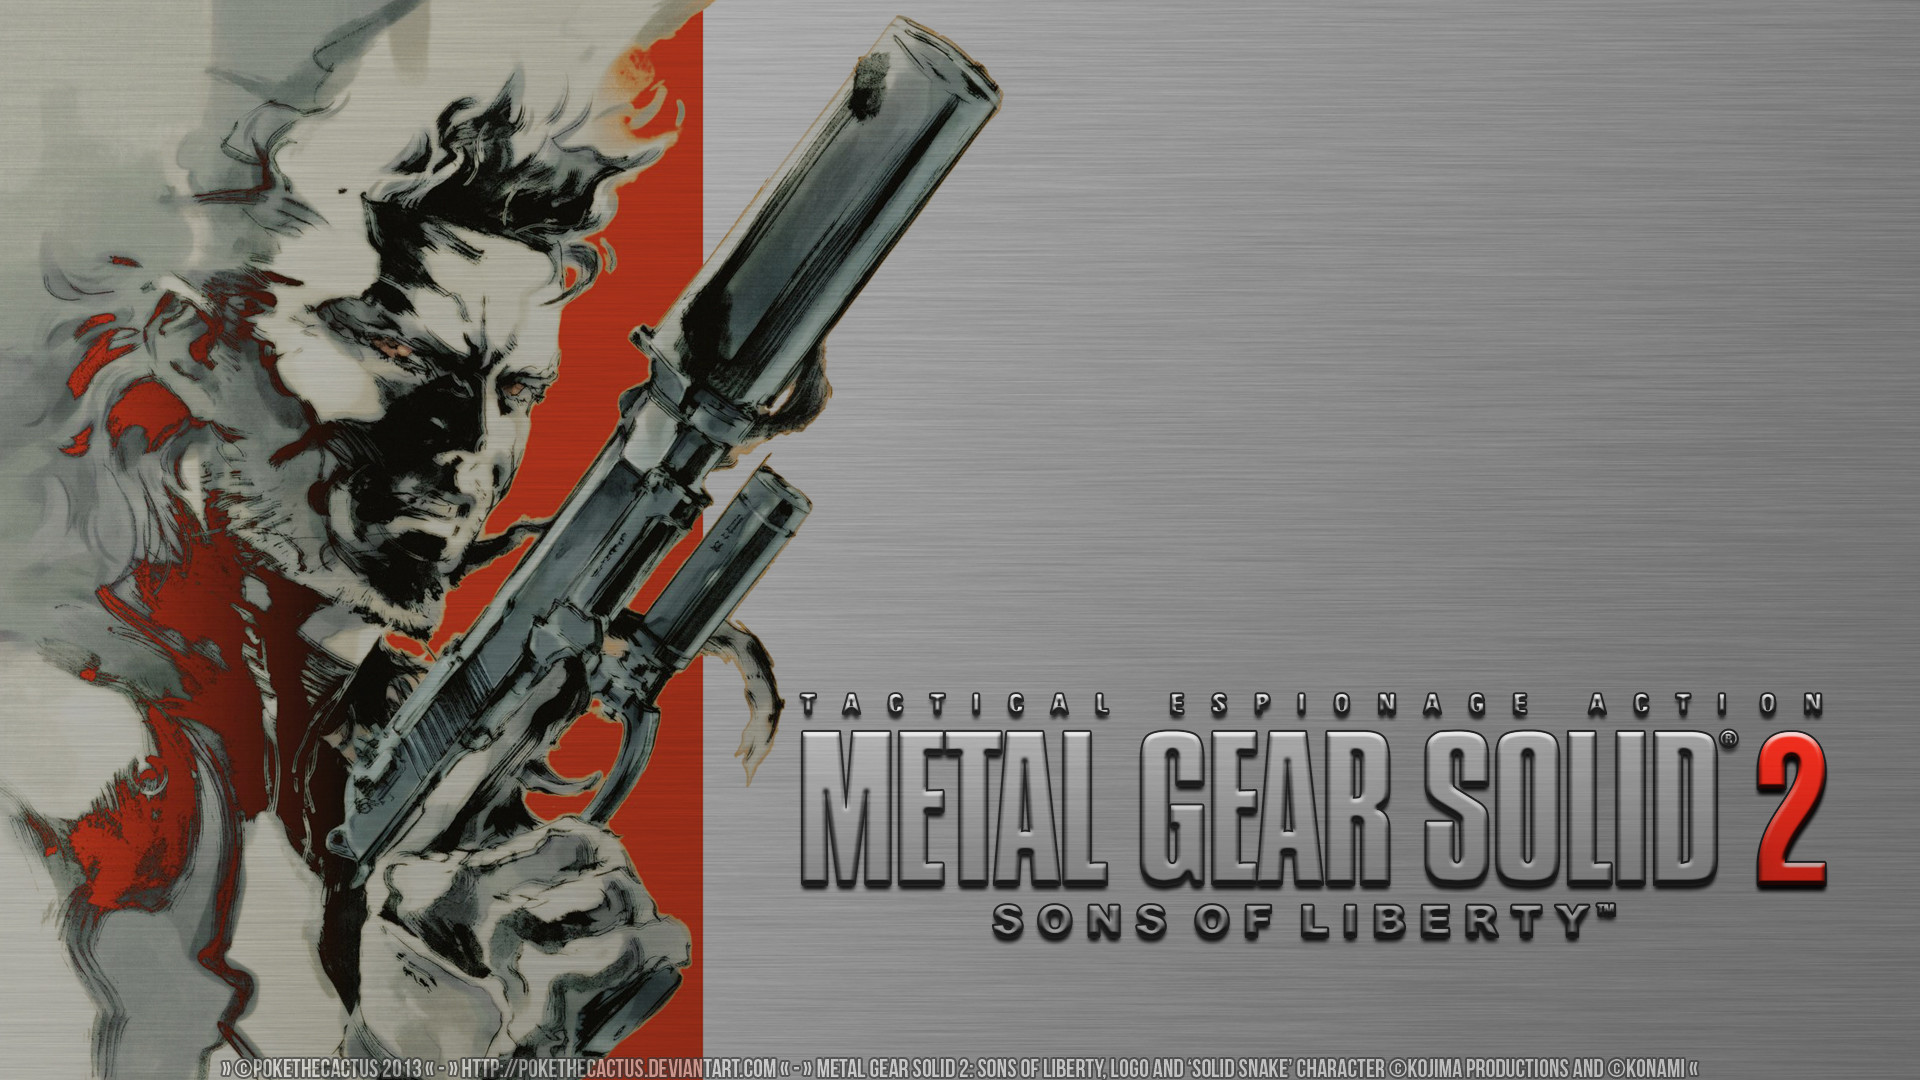 1920x1080 ... Classic - Metal Gear Solid 2 HD Wallpaper by PokeTheCactus